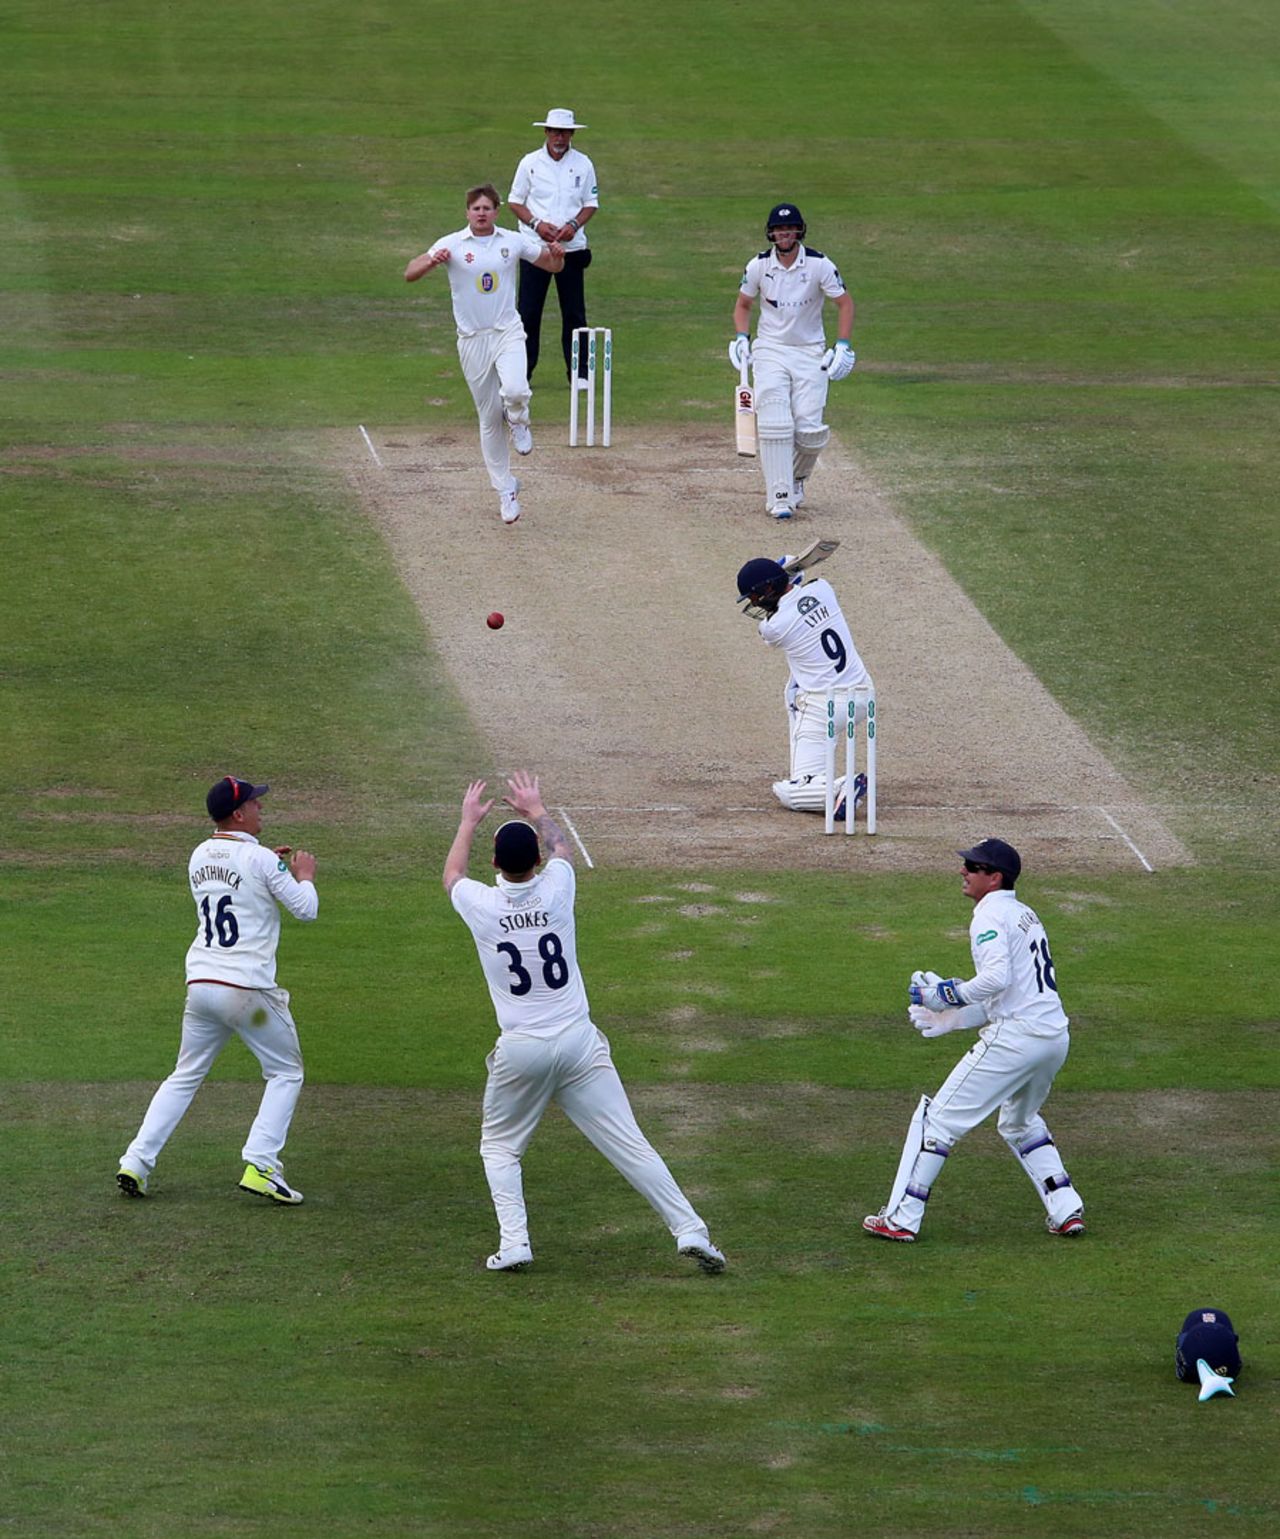 Ben Stokes took the catch to dismiss Adam Lyth, Durham v Yorkshire, County Championship, Division One, Chester-le-Street, 4th day, June 23, 2016